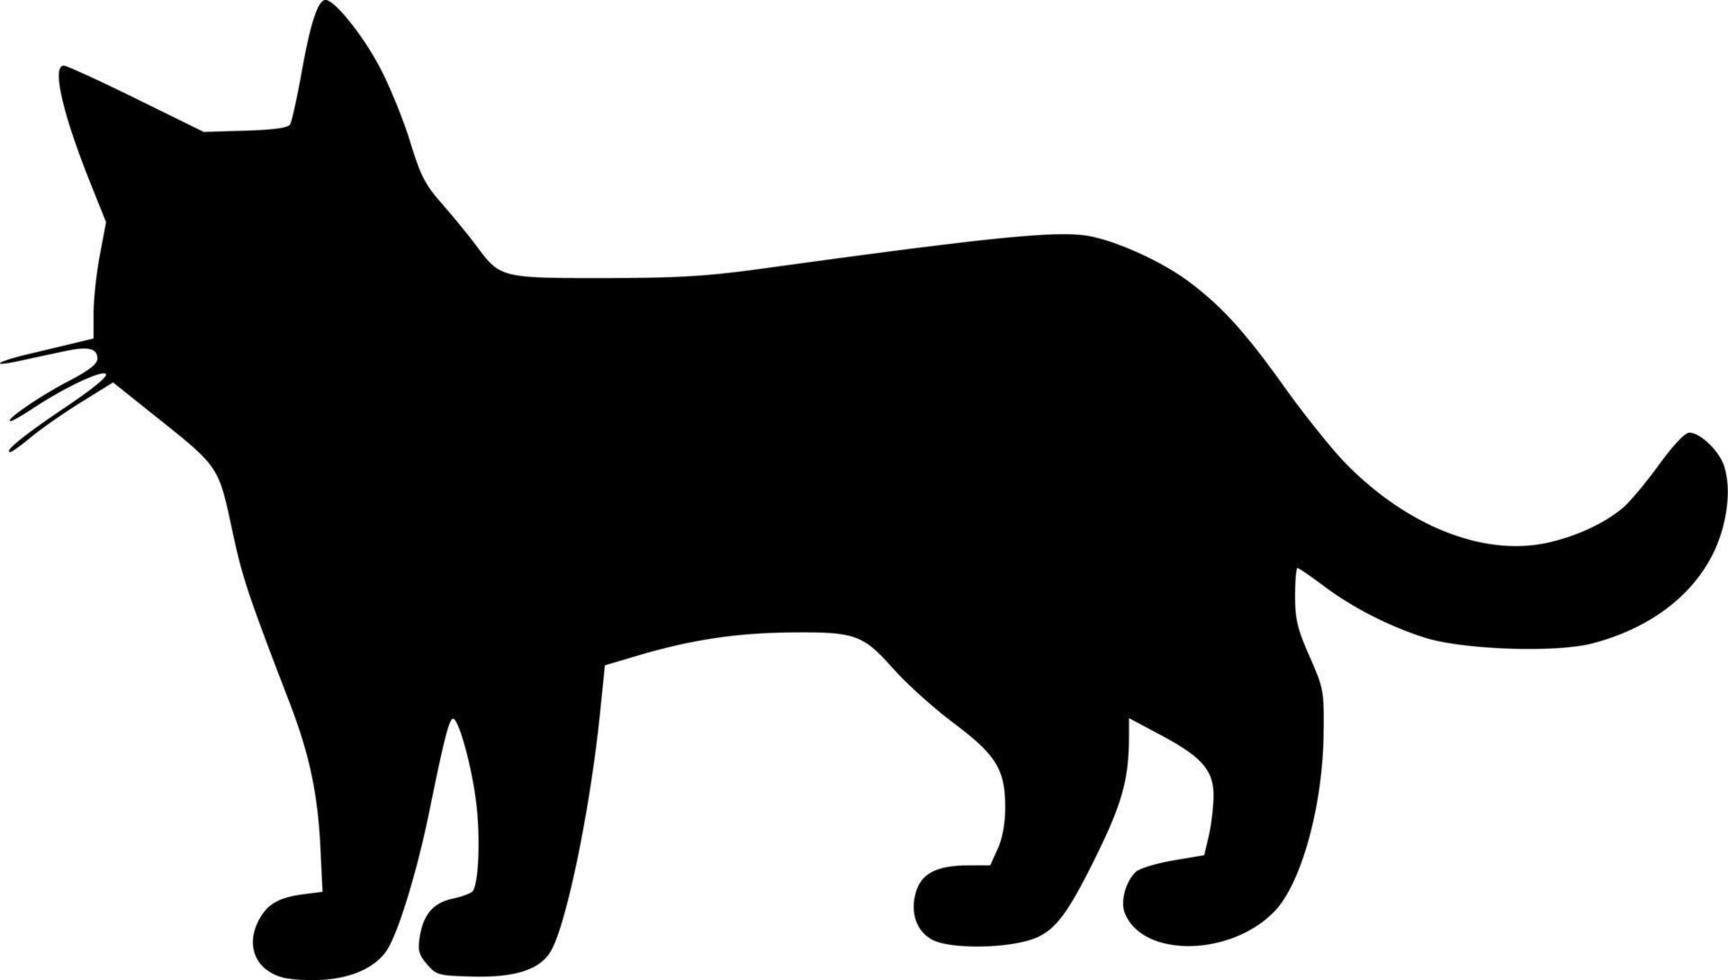 black and white of cat icon vector